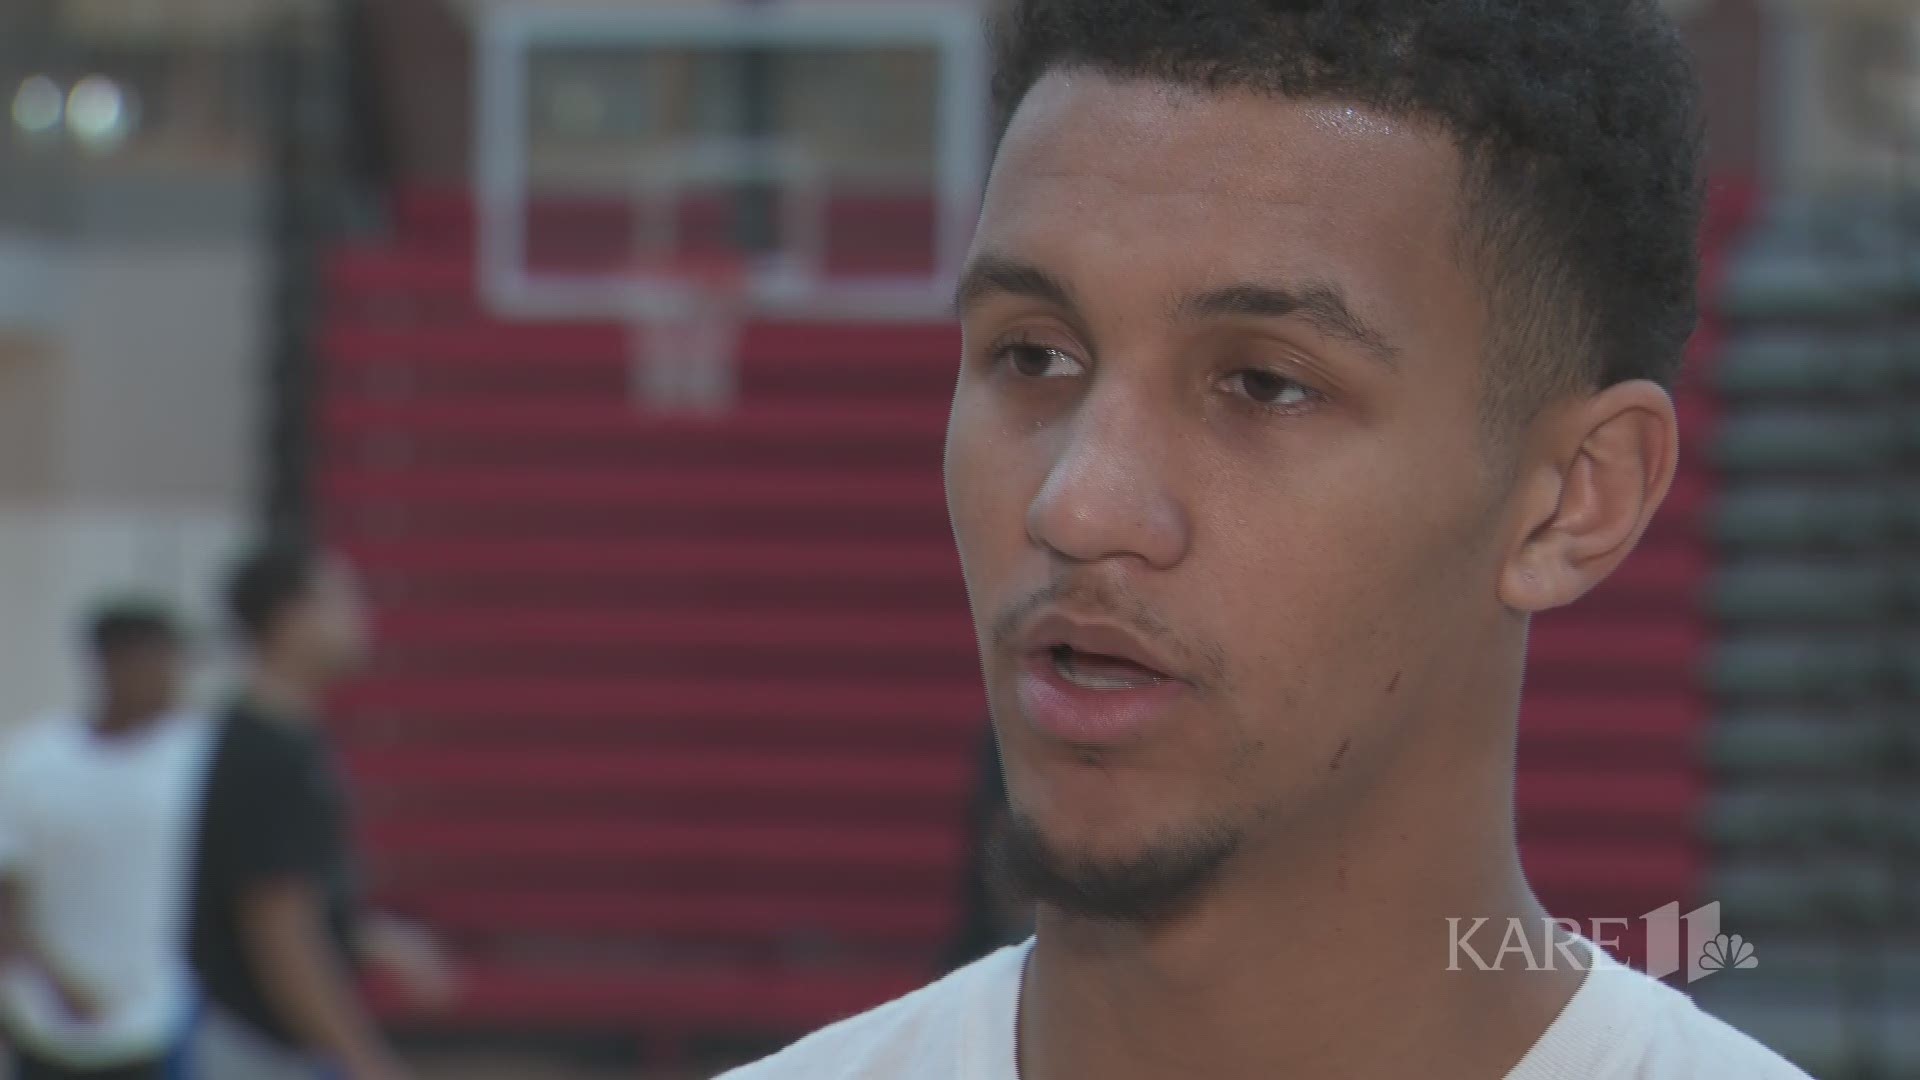 Minnehaha Academy senior Jalen Suggs talks about what he looks for most in a college.